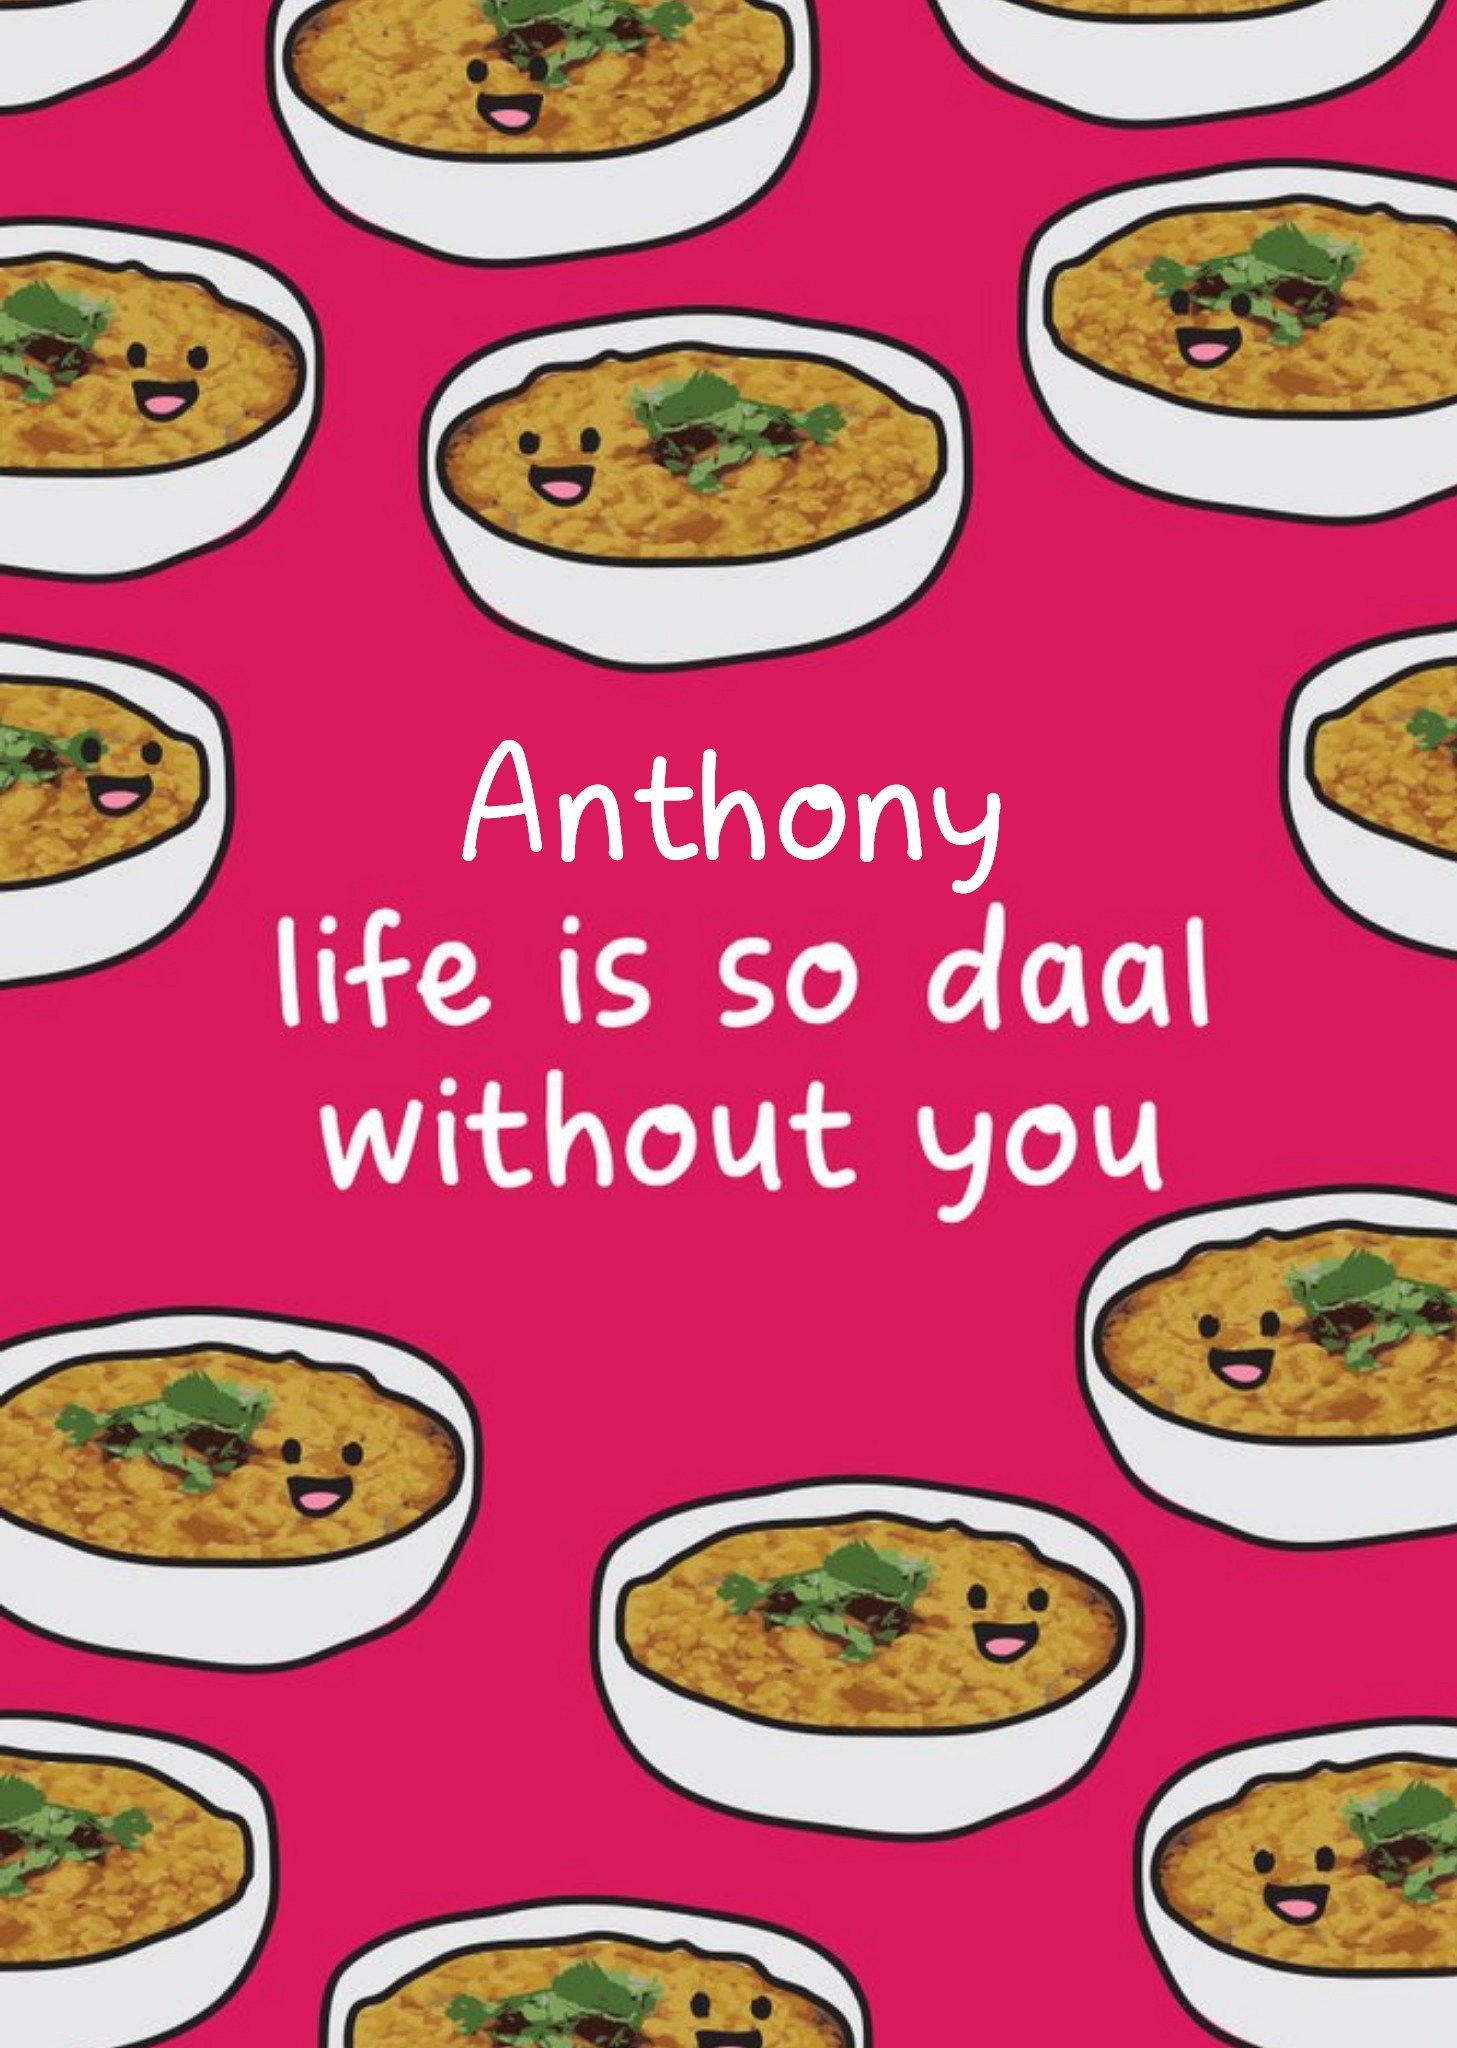 Moonpig Illustrated Bowls Of Daal. Life Is So Daal Without You Birthday Card Ecard